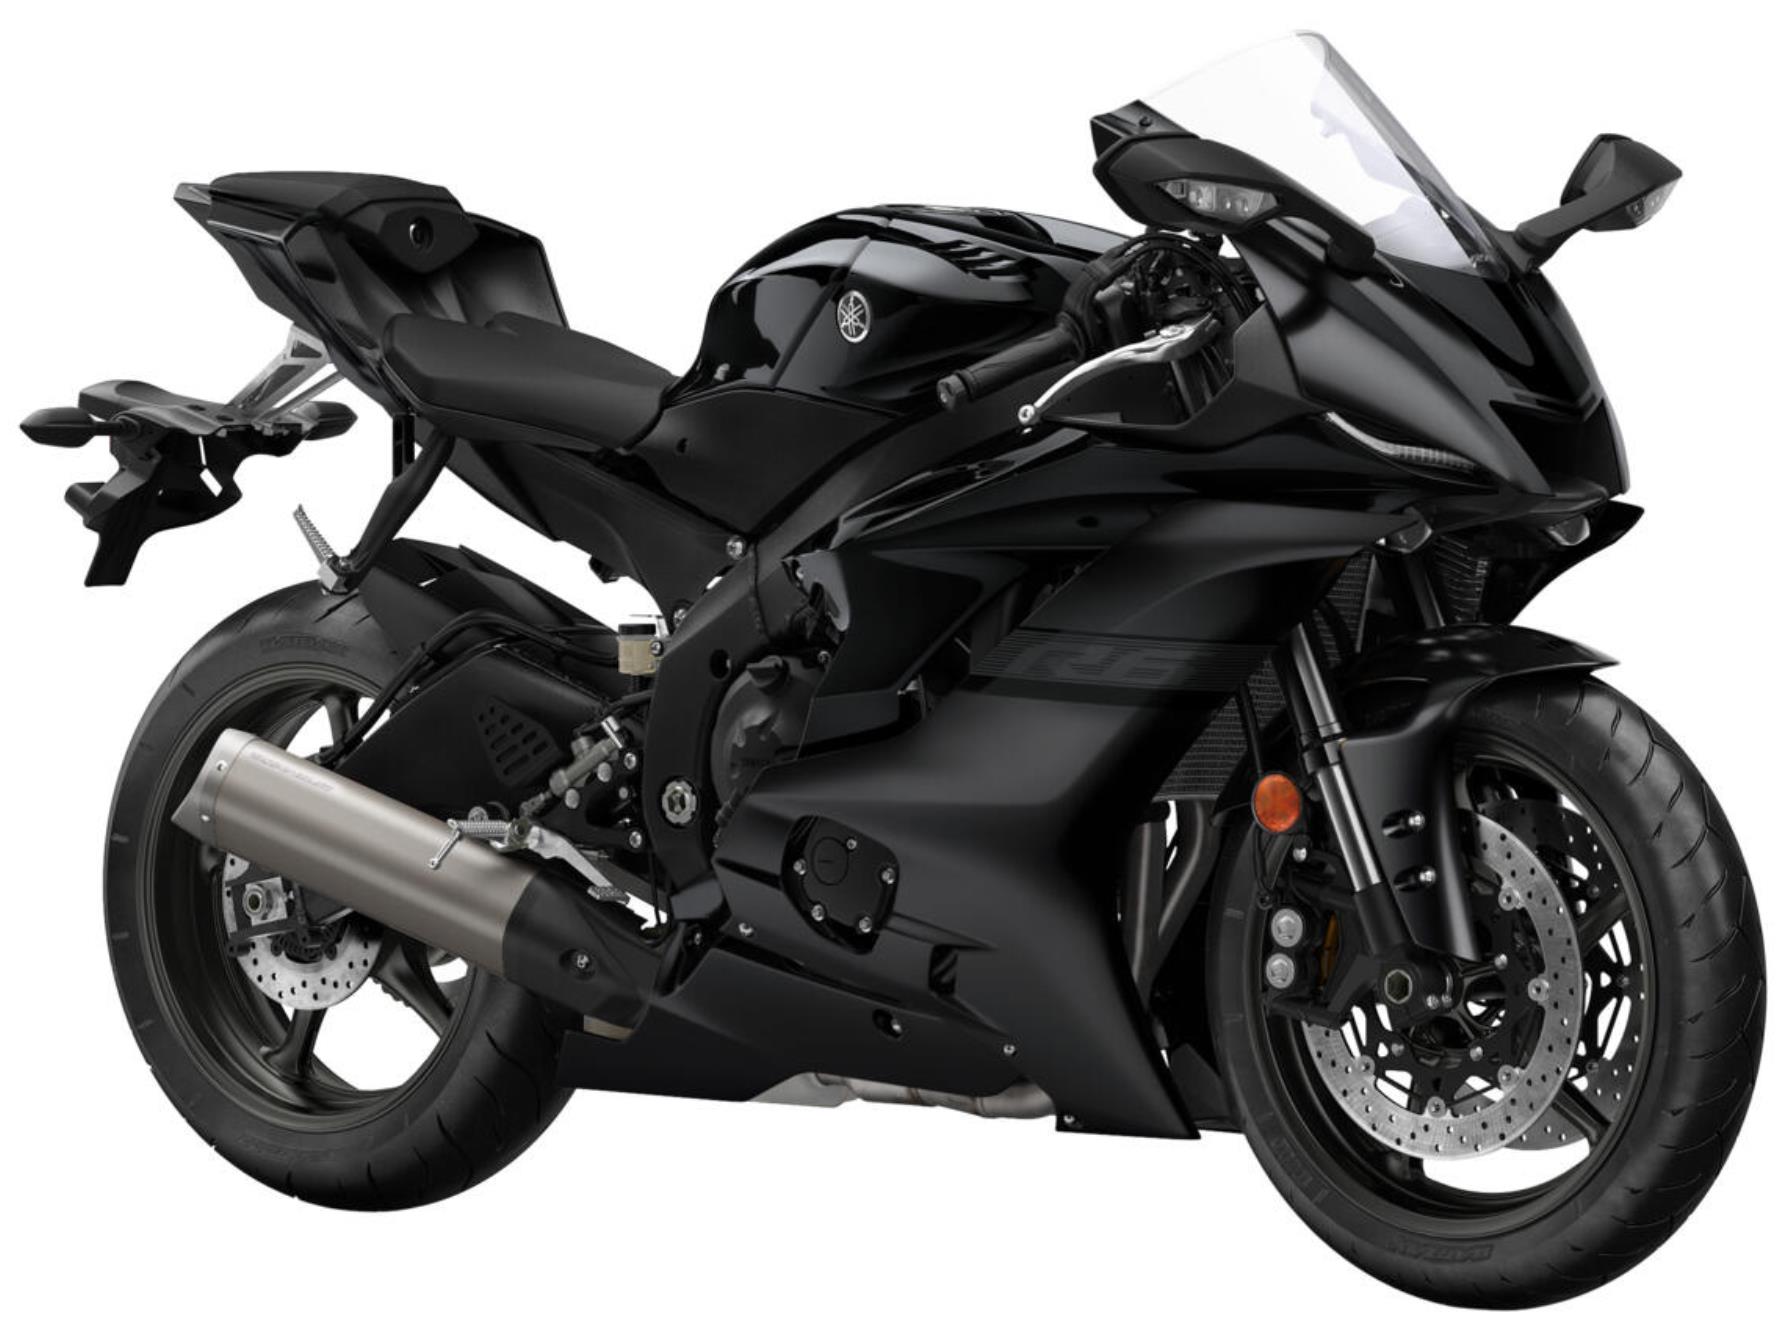 Yamaha YZFR6 Price, Specs, Top Speed & Mileage in India